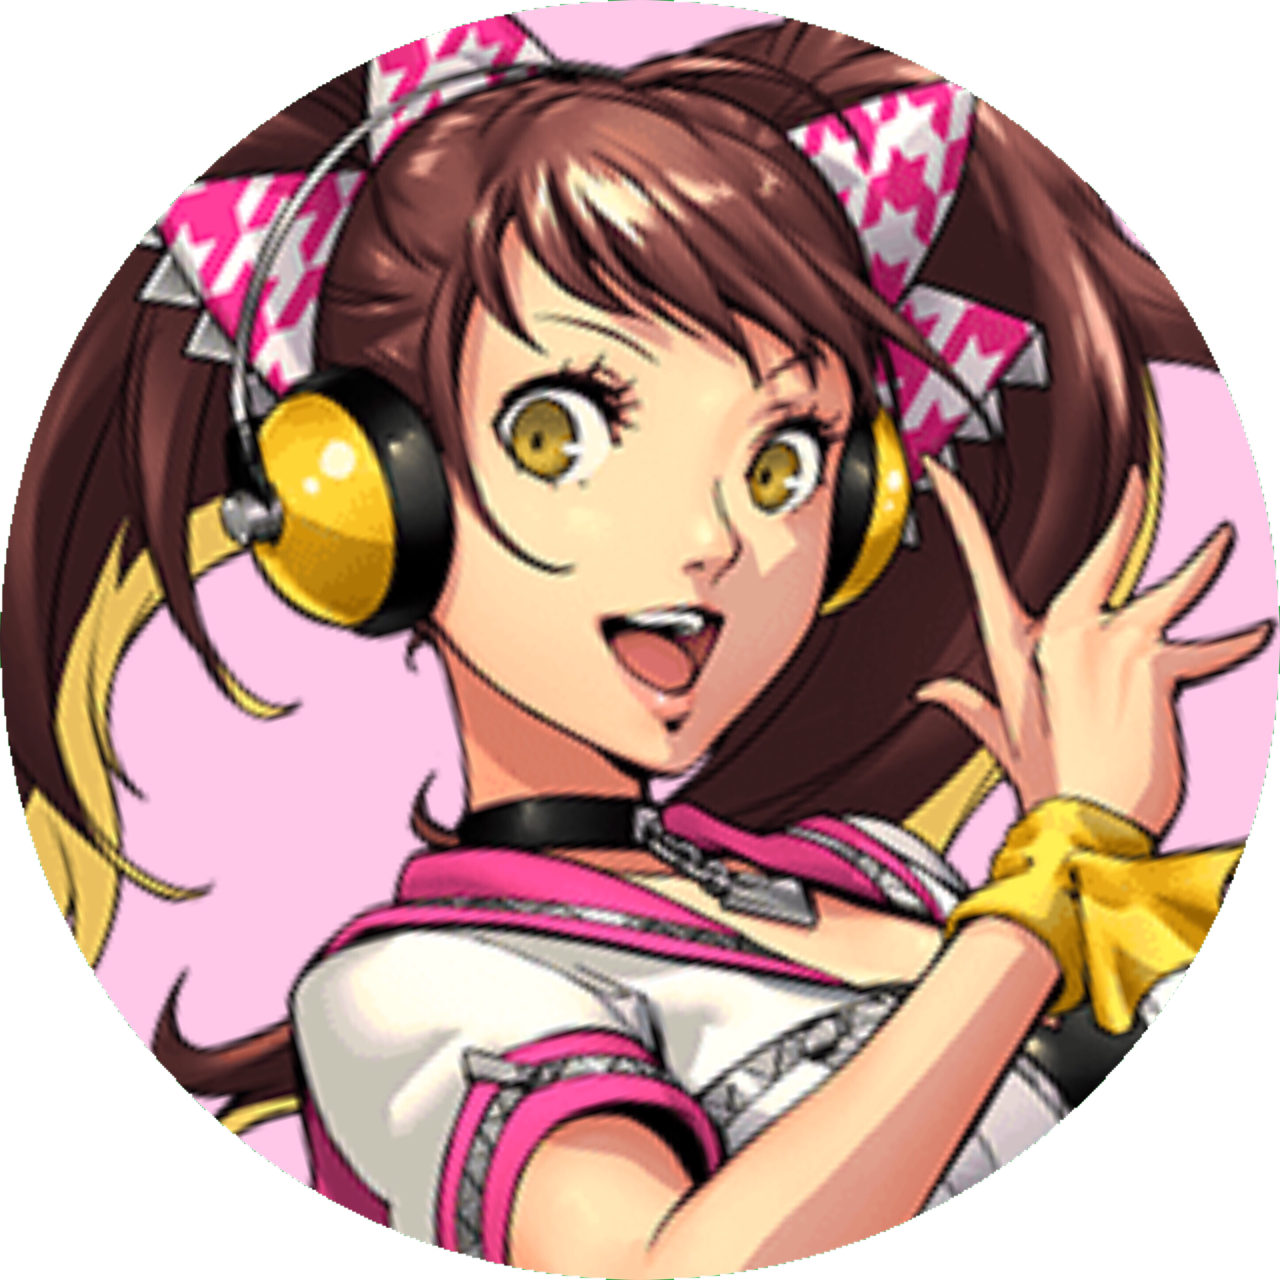 Download Ann Takamaki Png PNG Image with No Background - PNGkey.com